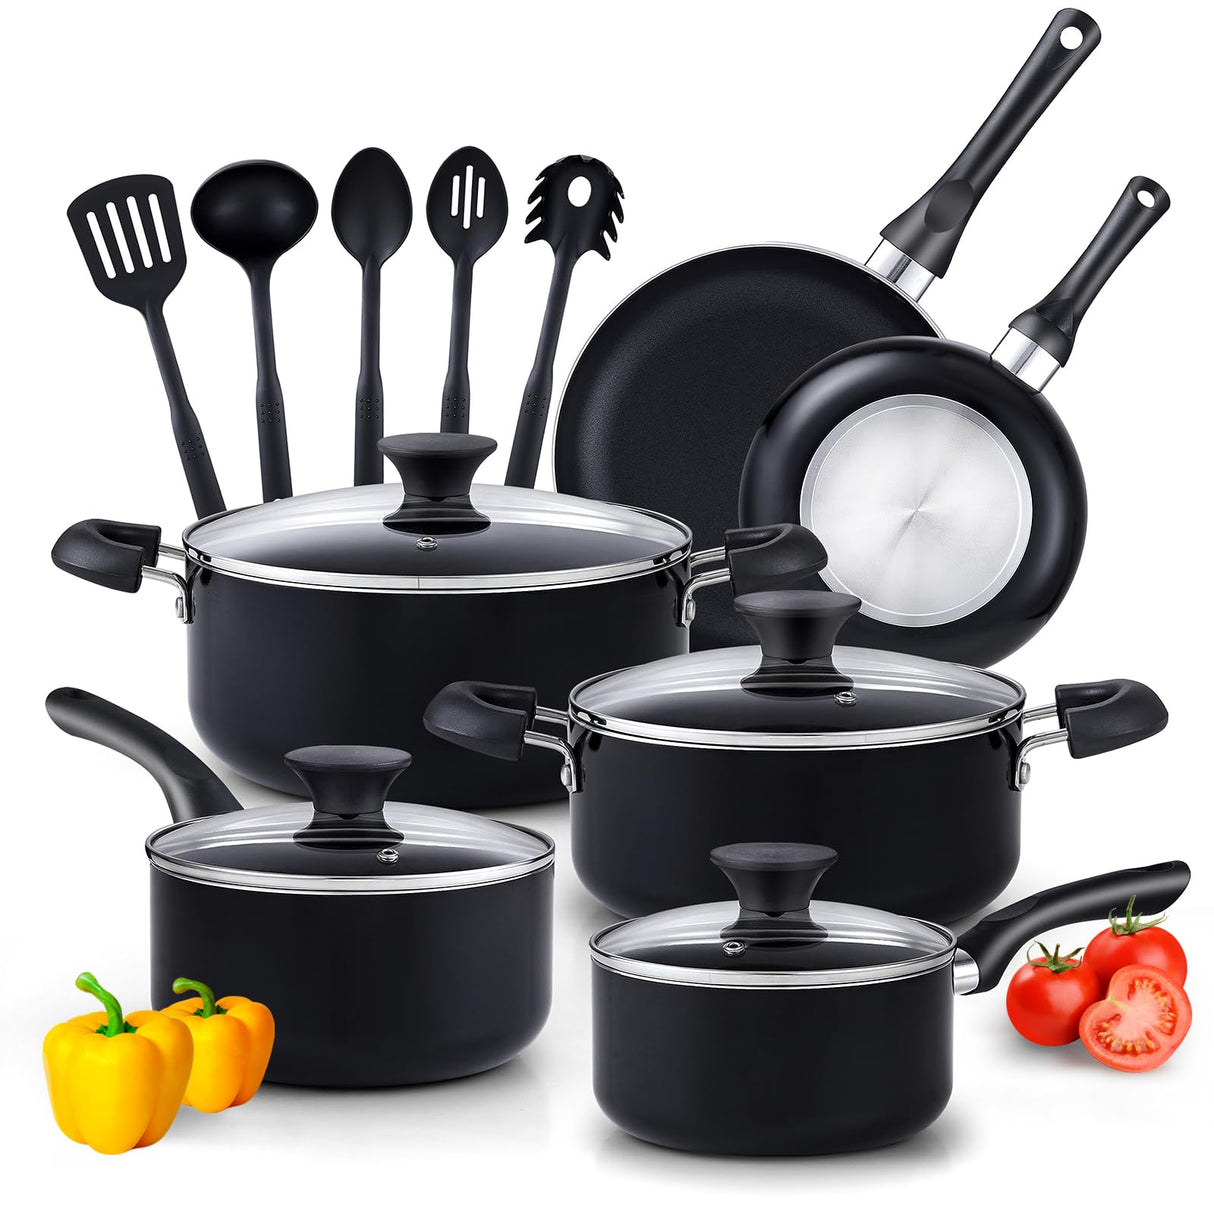 Cook N Home Basics Pots and Pans Cooking, 15-Piece Nonstick Cookware Set, Black